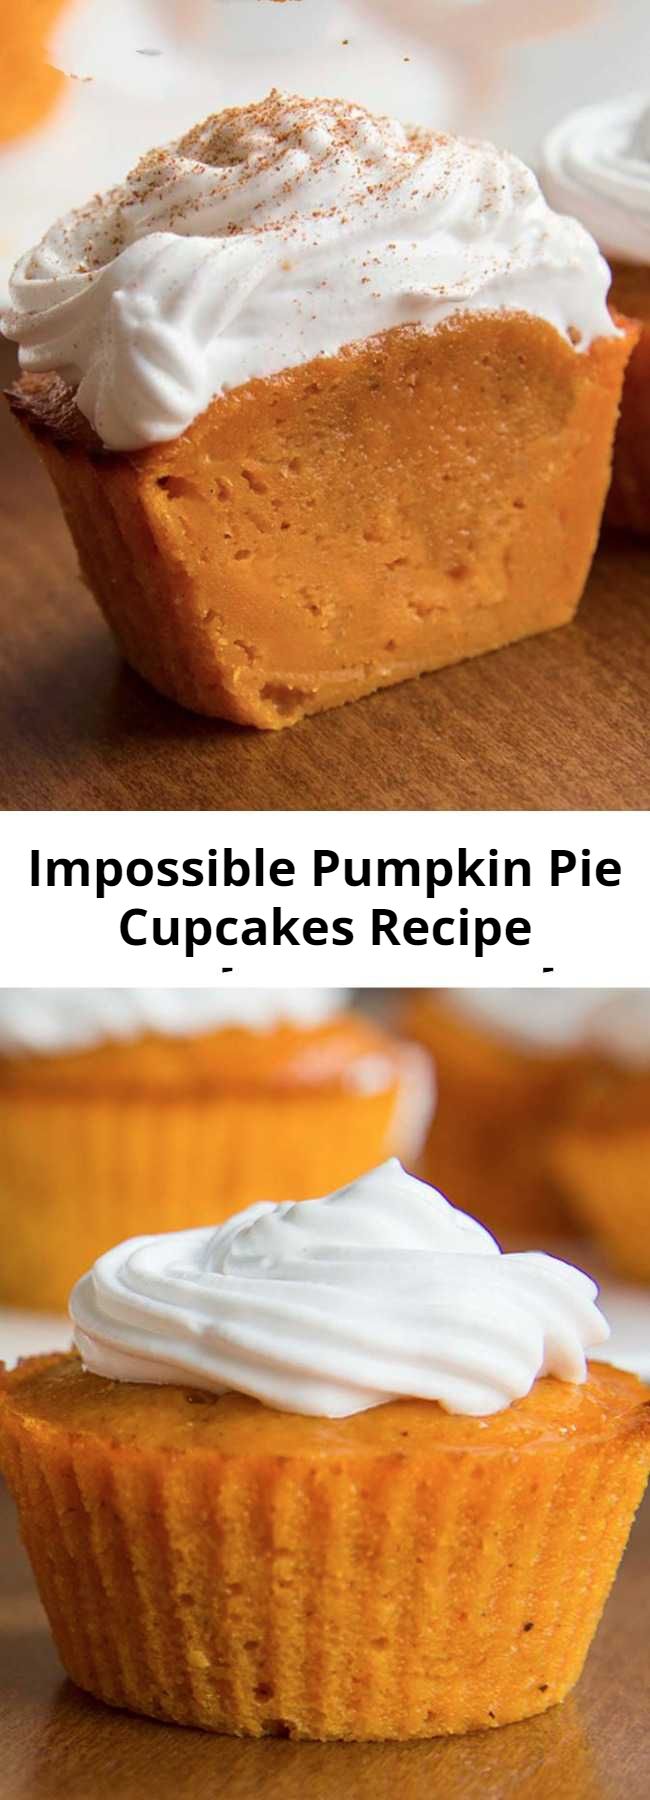 Impossible Pumpkin Pie Cupcakes Recipe - Impossible Perfect Fall treat! De-lic-ious Pumpkin Pie Cupcakes. They taste just like pumpkin pie filling, but are sturdy enough to eat with your hands. You’ll love these because they’re not overly sweet, and they’re pumpkin-y without being overpowering, plus the batter is crazy easy to make too. #recipes #pumpkin #cupcakes